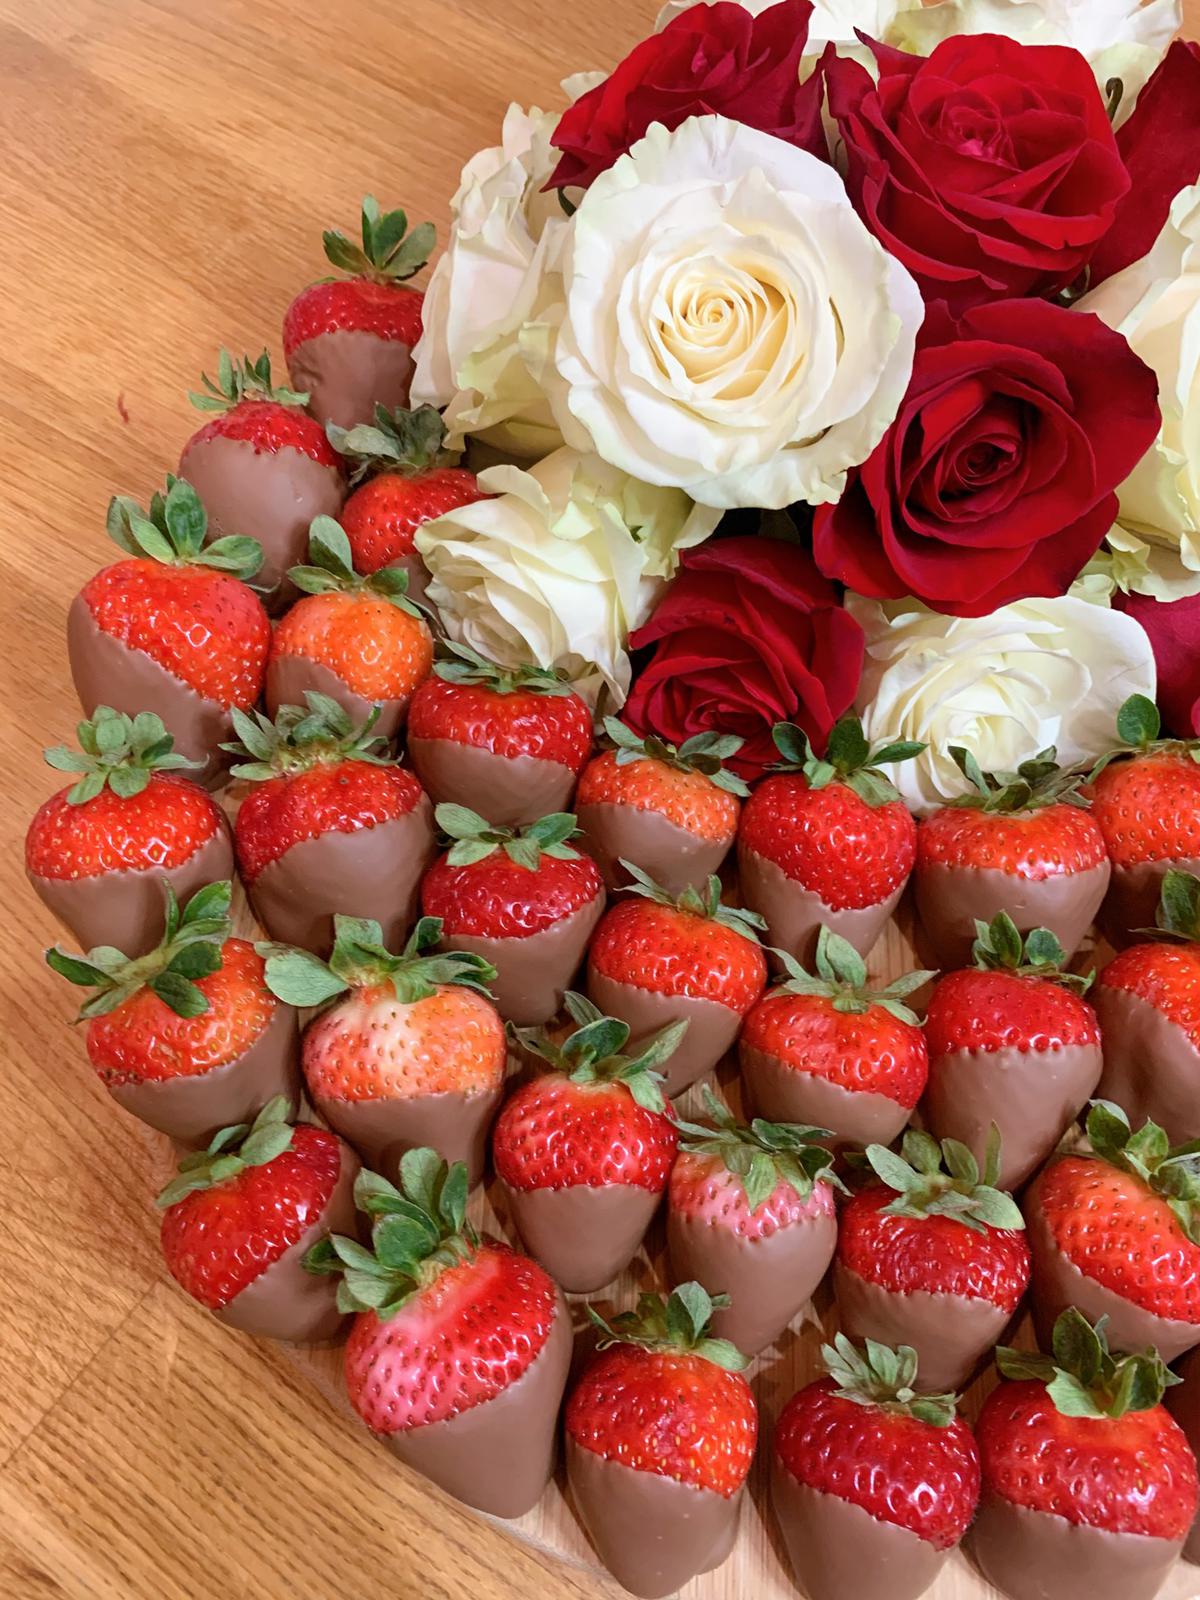 Chocolate Cake Topped with Strawberries - Birthday Chocolate Cake Delivery by Edible Arrangements